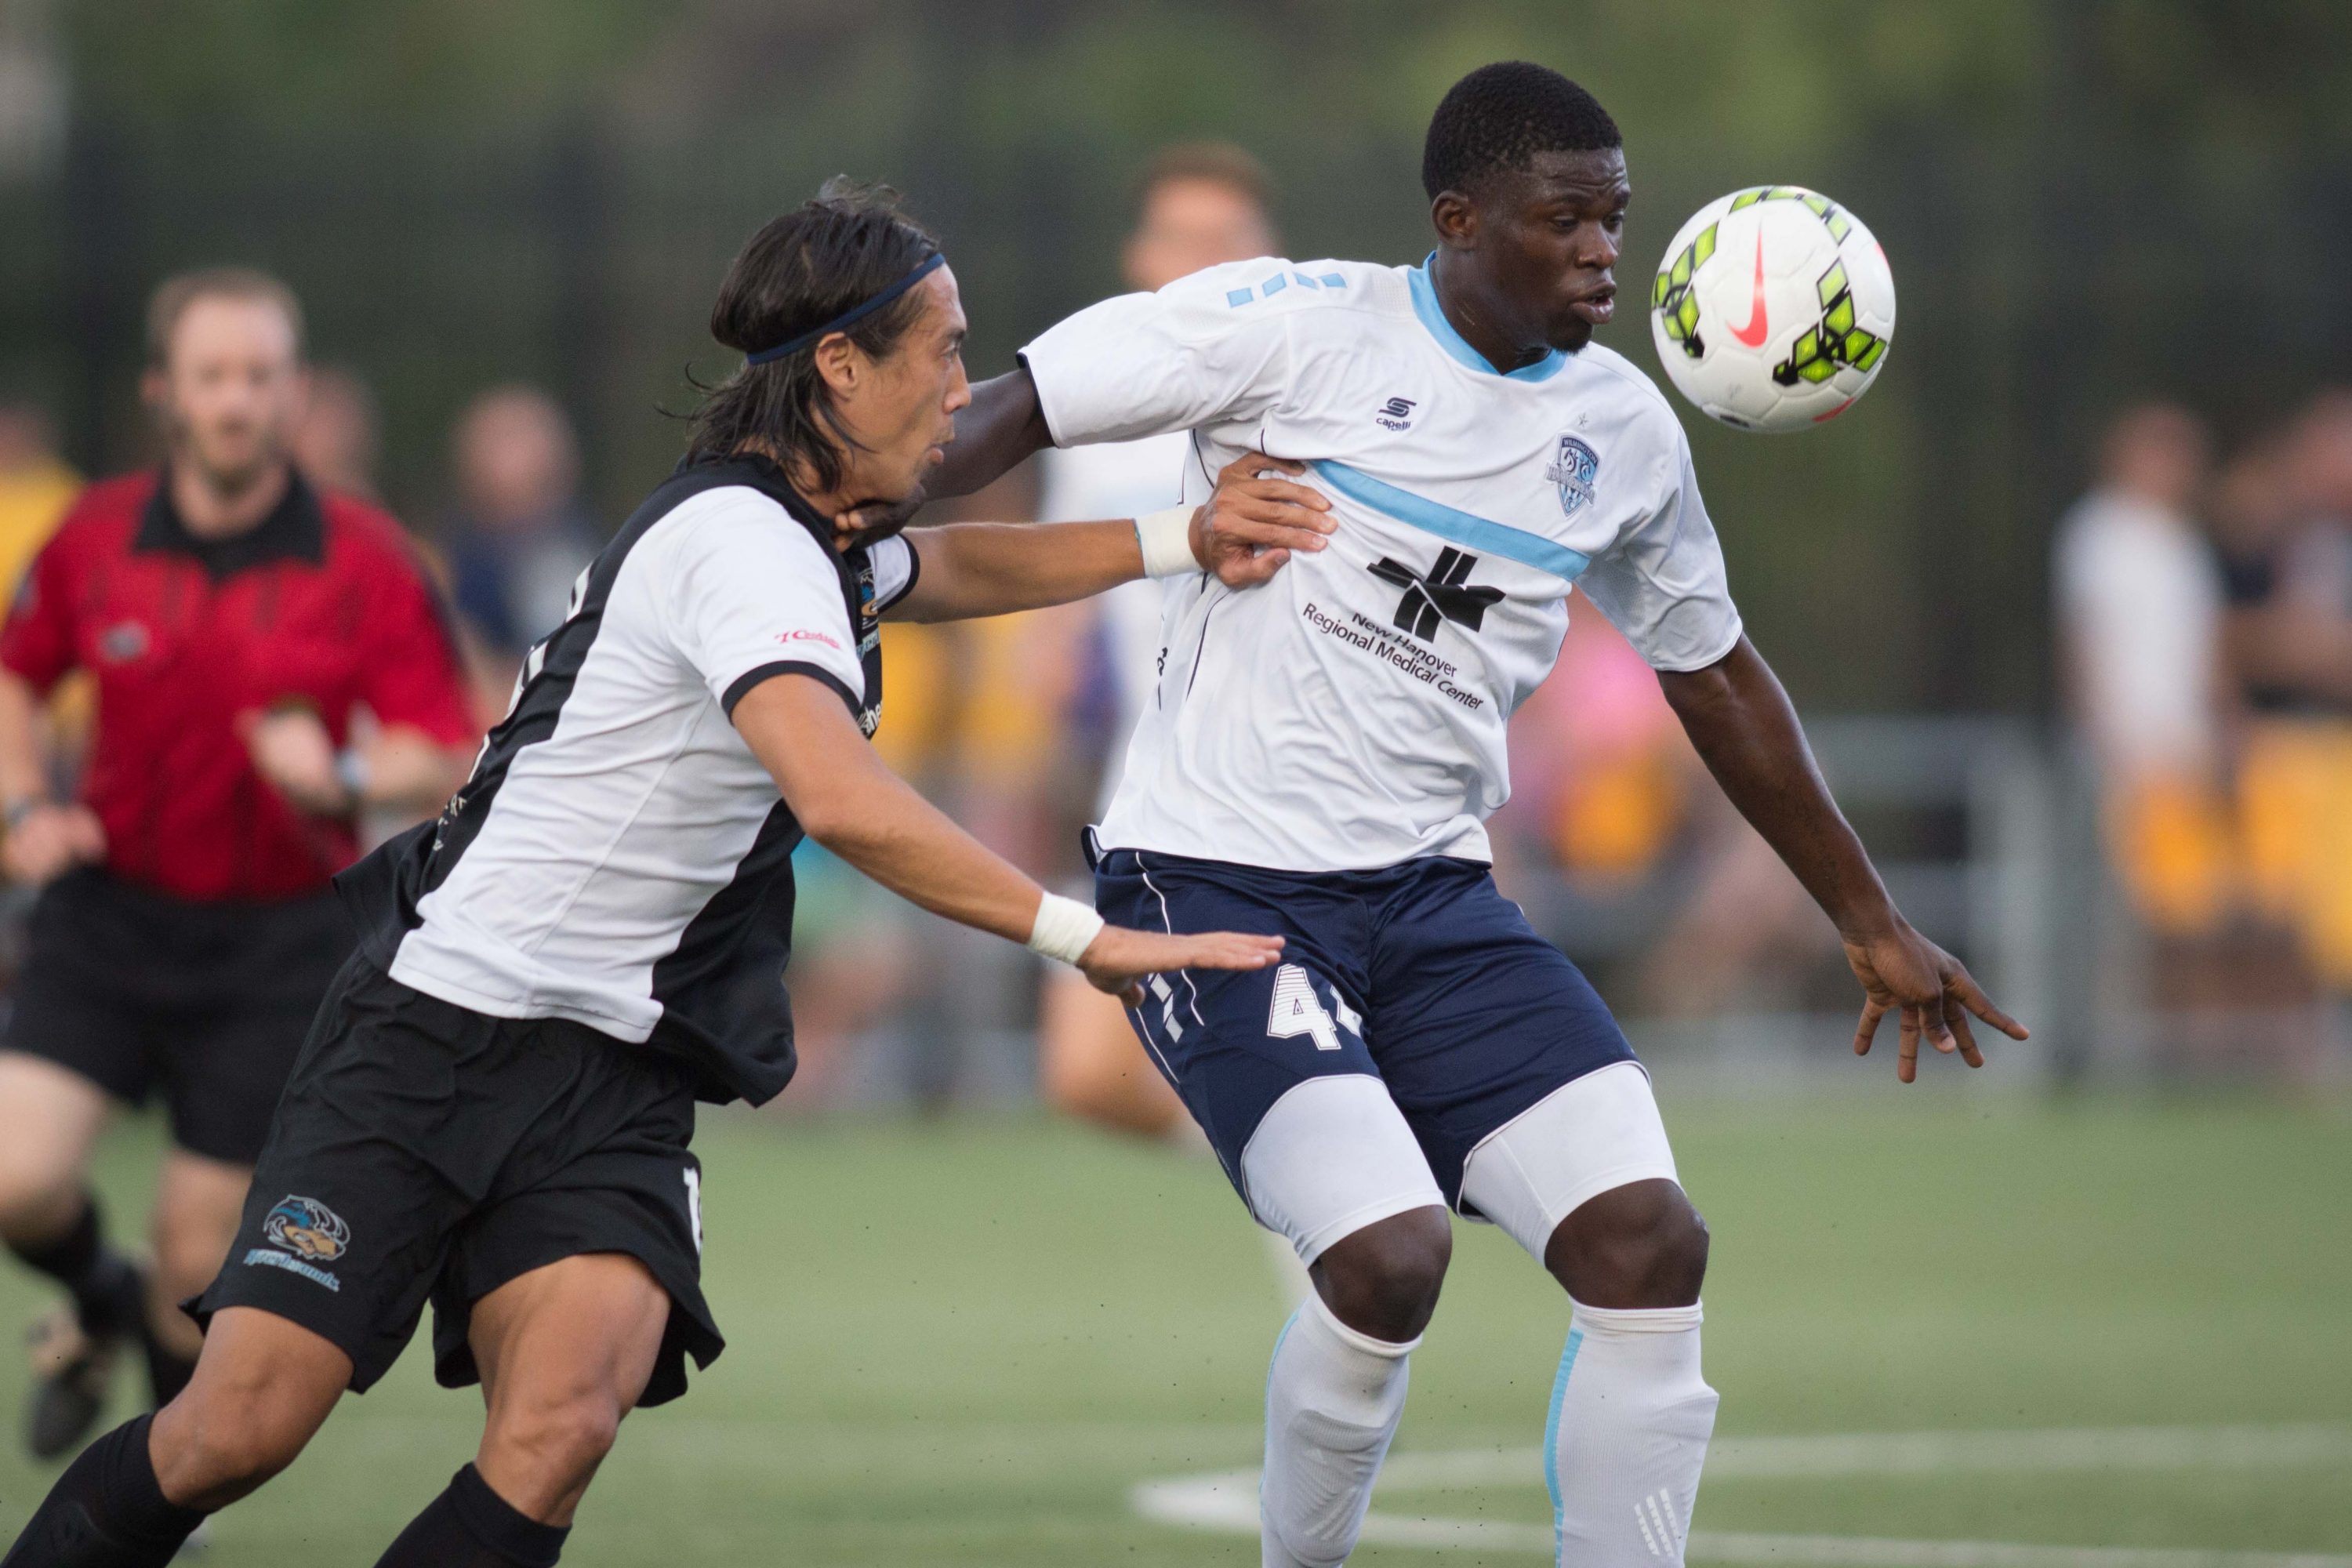 Former Riverhounds defender, Willie Hunt, pictured left, had a rough night in October.  